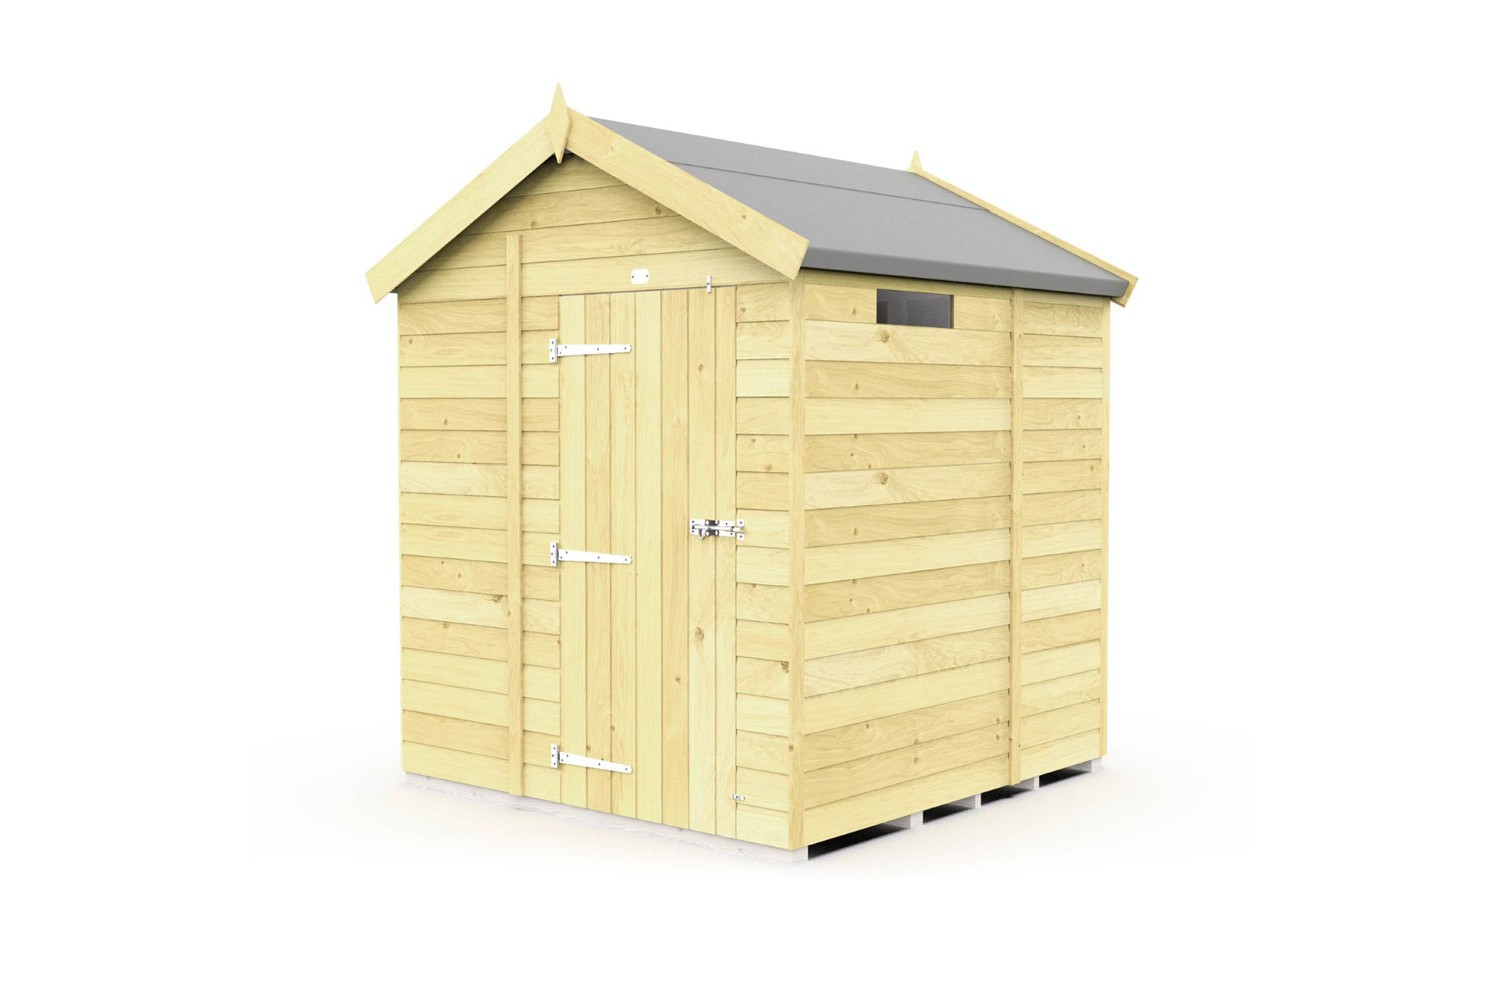 6ft x 5ft Apex Security Shed